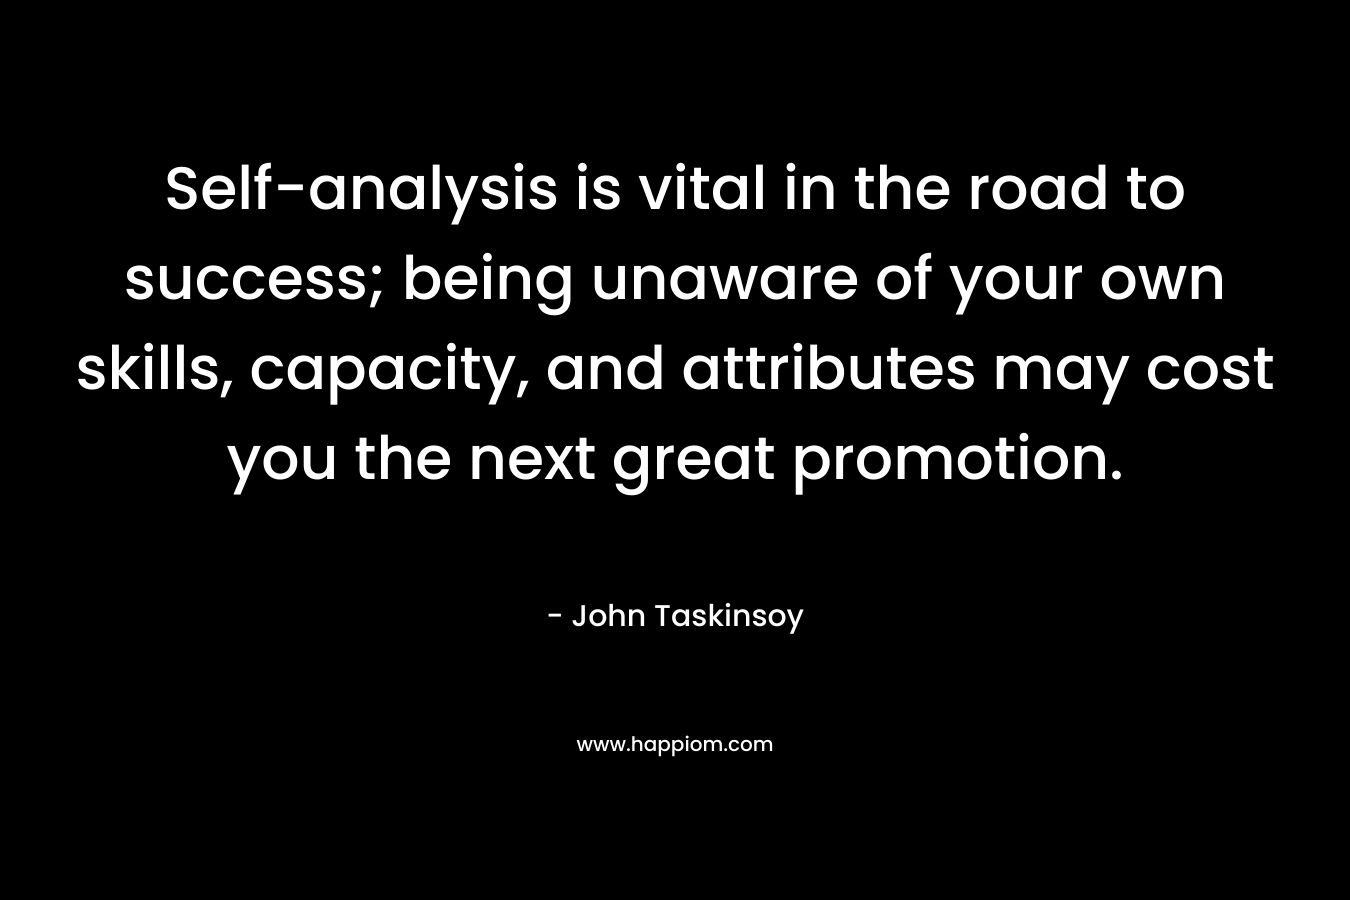 Self-analysis is vital in the road to success; being unaware of your own skills, capacity, and attributes may cost you the next great promotion.